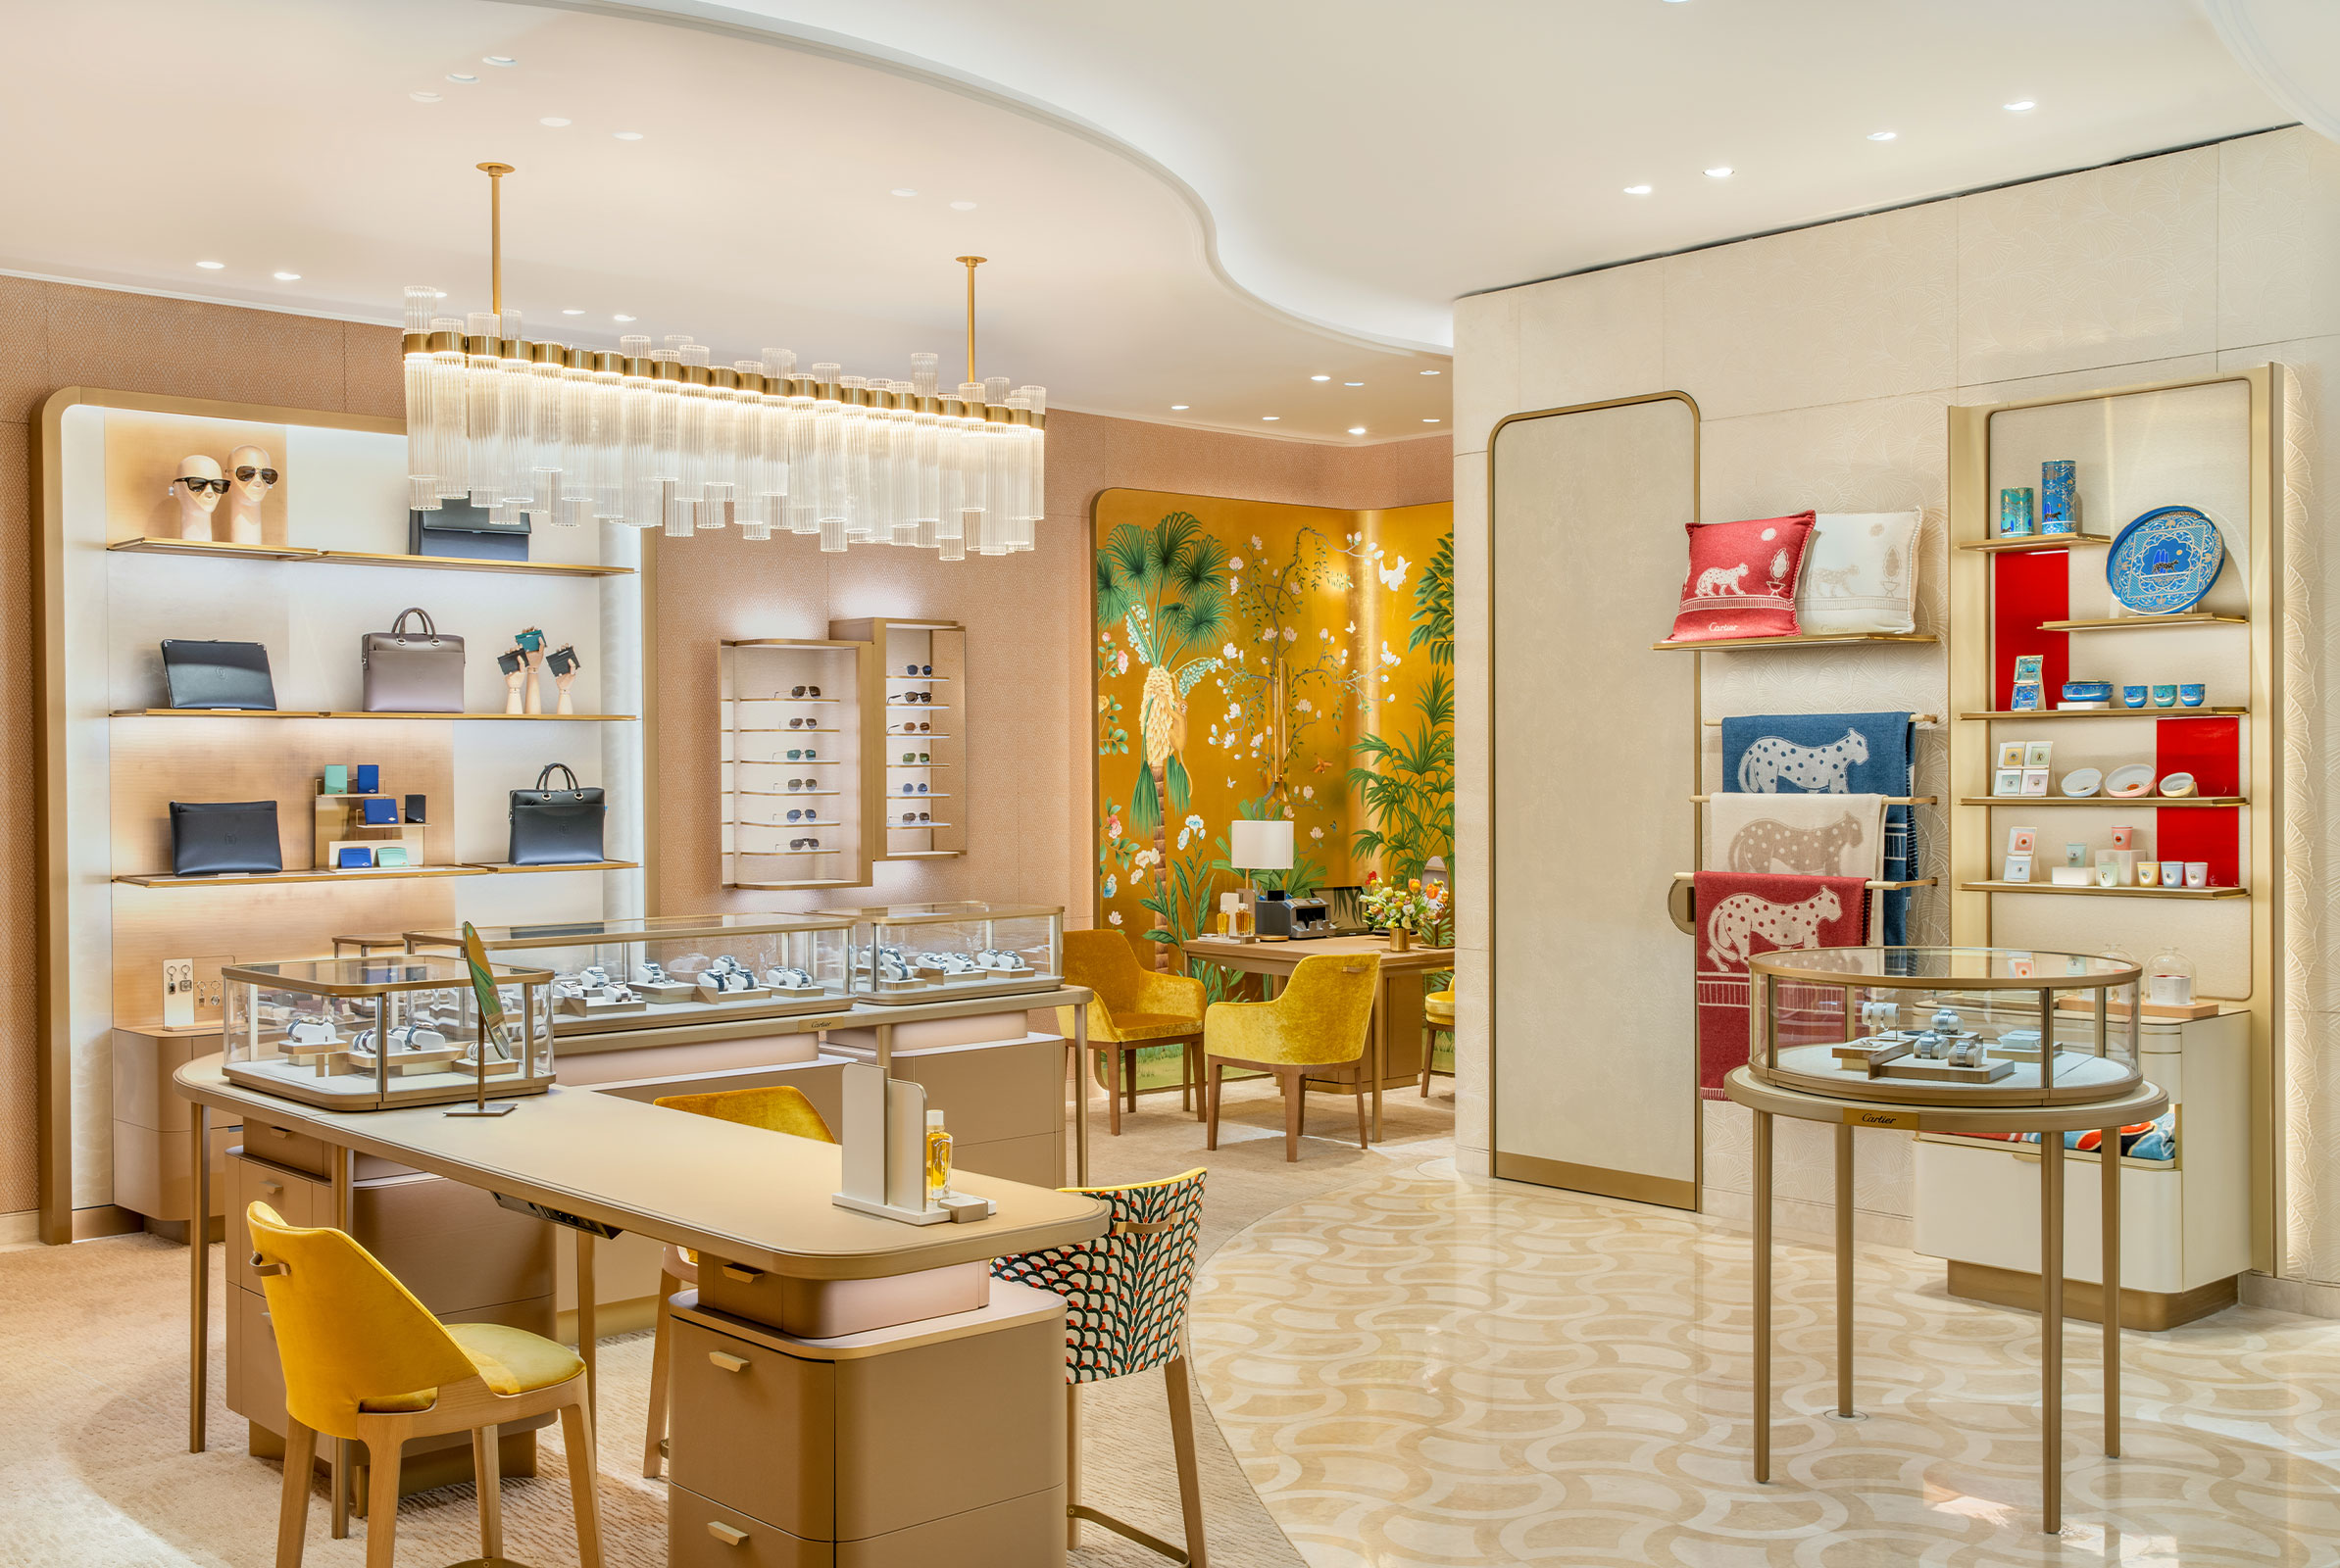 Cartier's New Boutique is Inspired by Philippine Culture